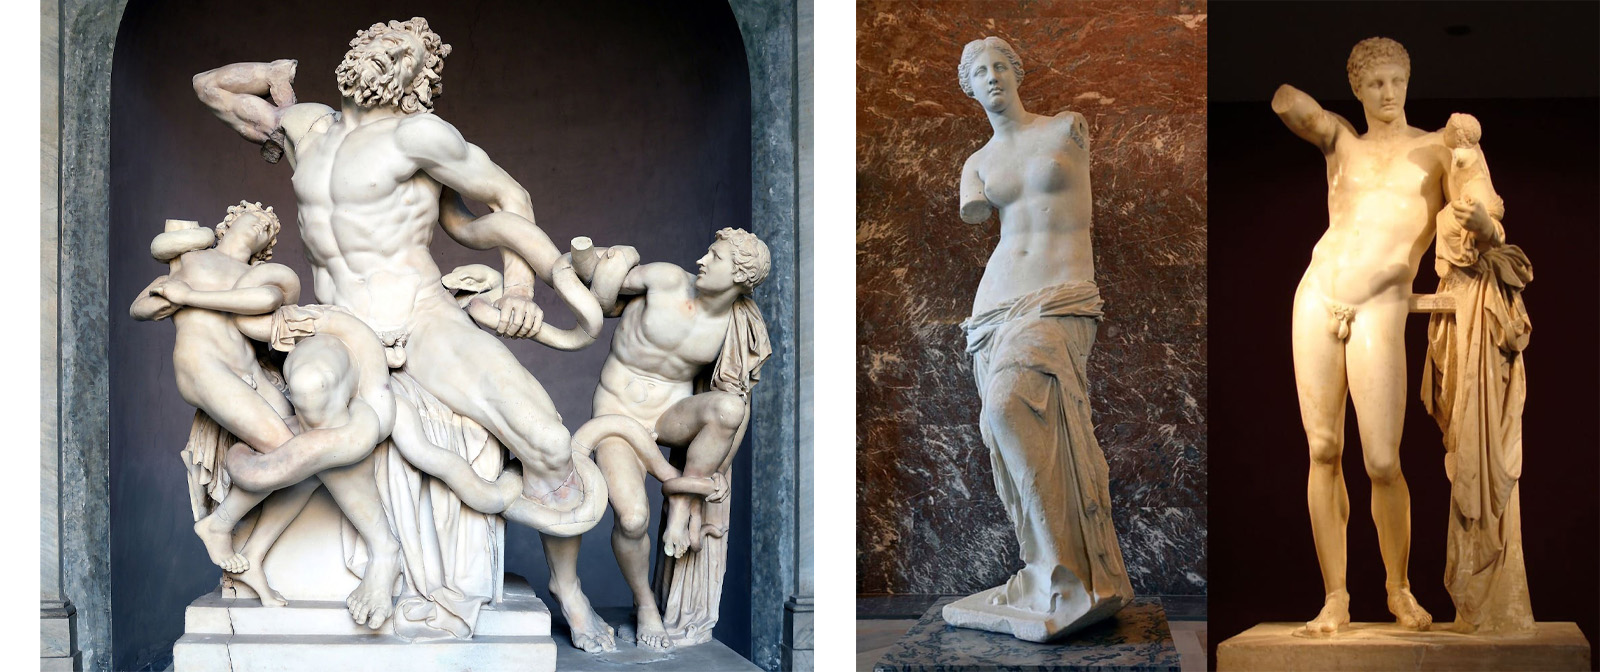 Fooled everyone. What secret did the Louvre management hide when they exhibited the famous Venus of Milos statue?